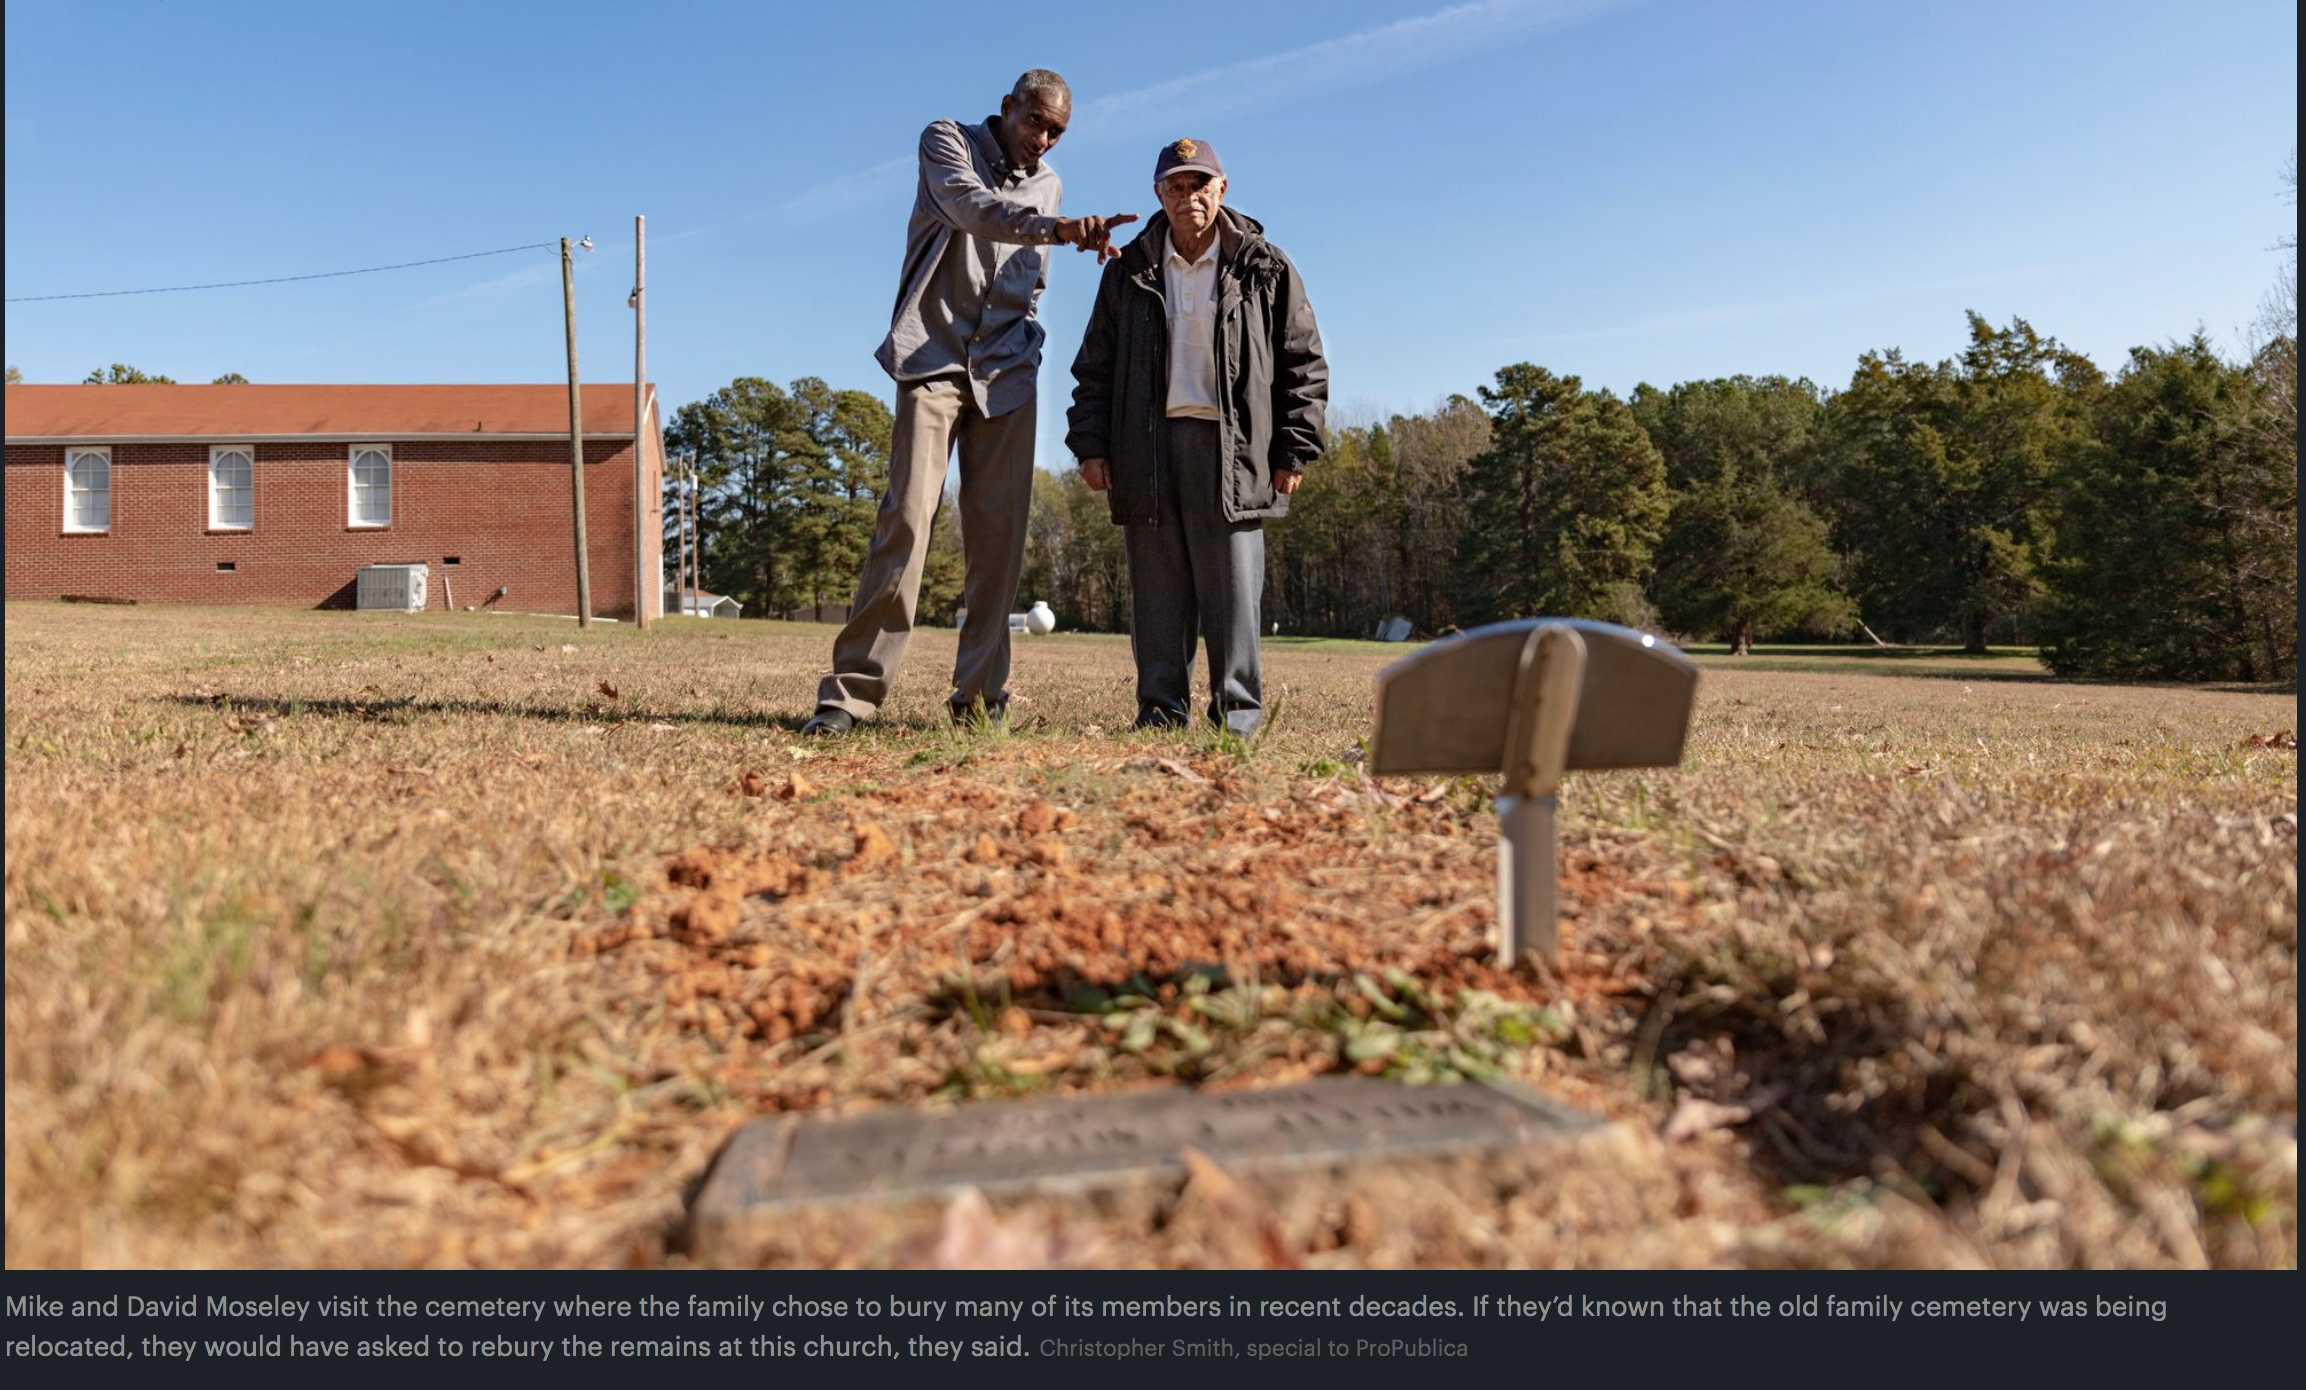 Microsoft Paid Consultants To Use Racist Tactics To Erase Historic Black Cemetery To Construct Data Center